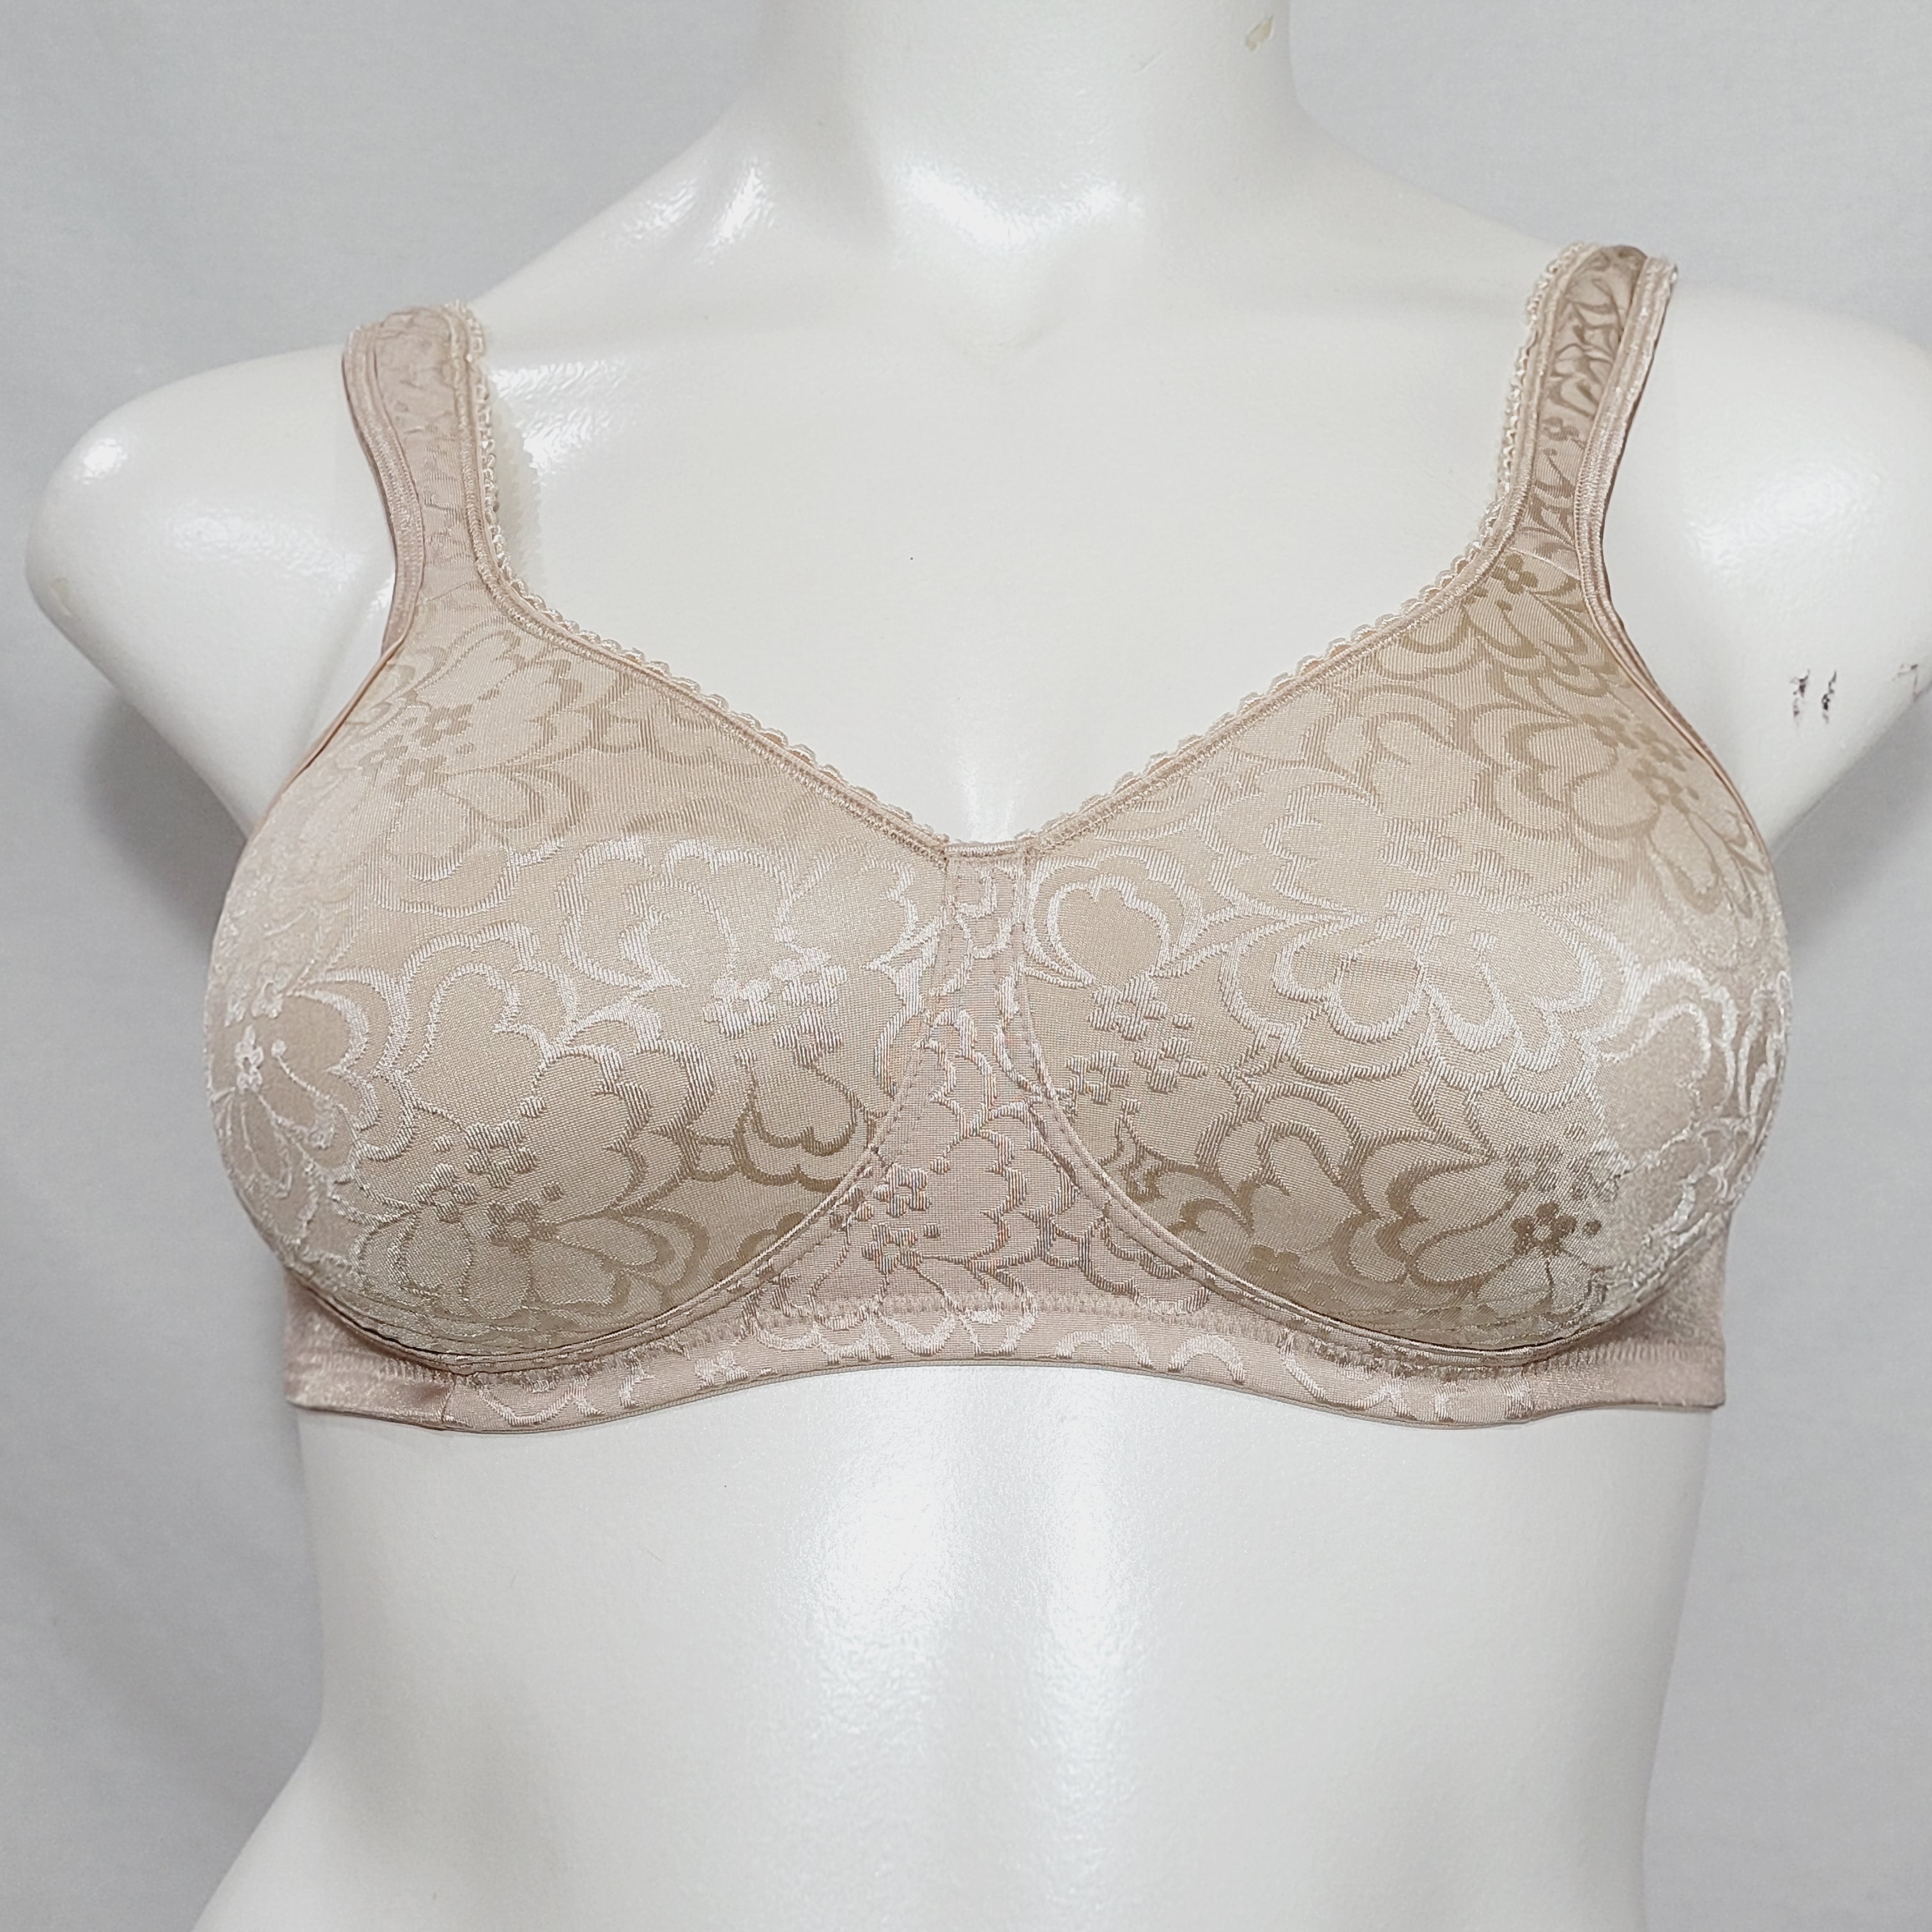 PLAYTEX 18 HOUR ULTIMATE LIFT AND SUPPORT WIREFREE BRA - 48DDD